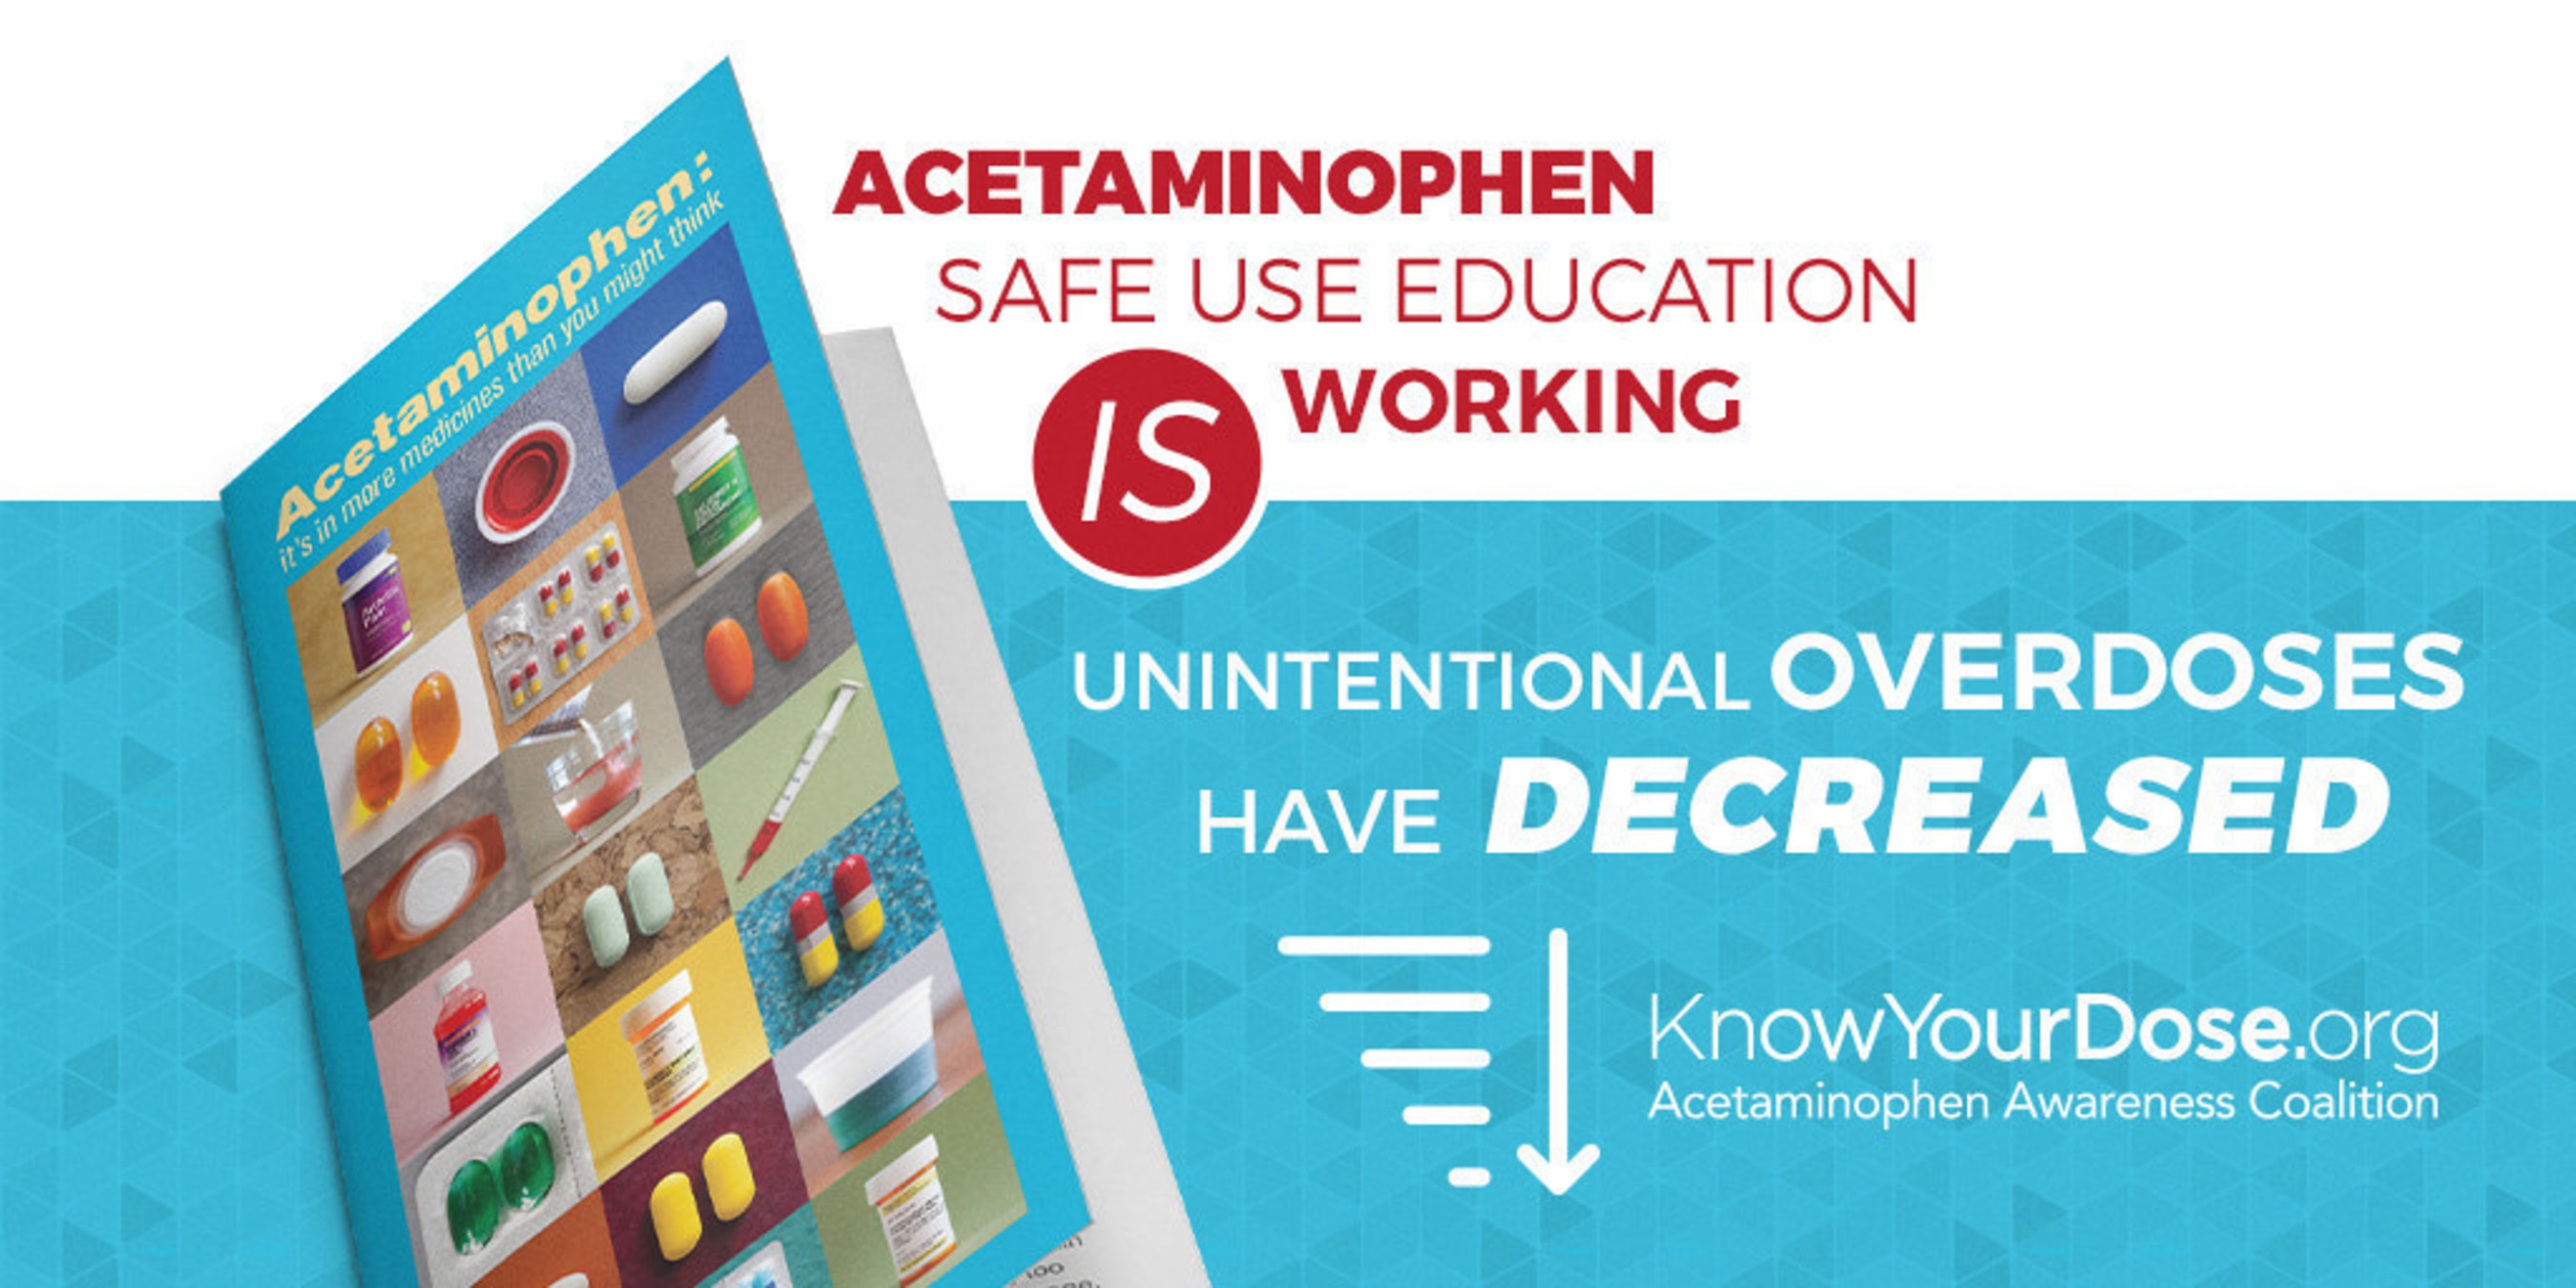 The Acetaminophen Awareness Coalition highlights research showing that progress is being made to increase safe use of acetaminophen.